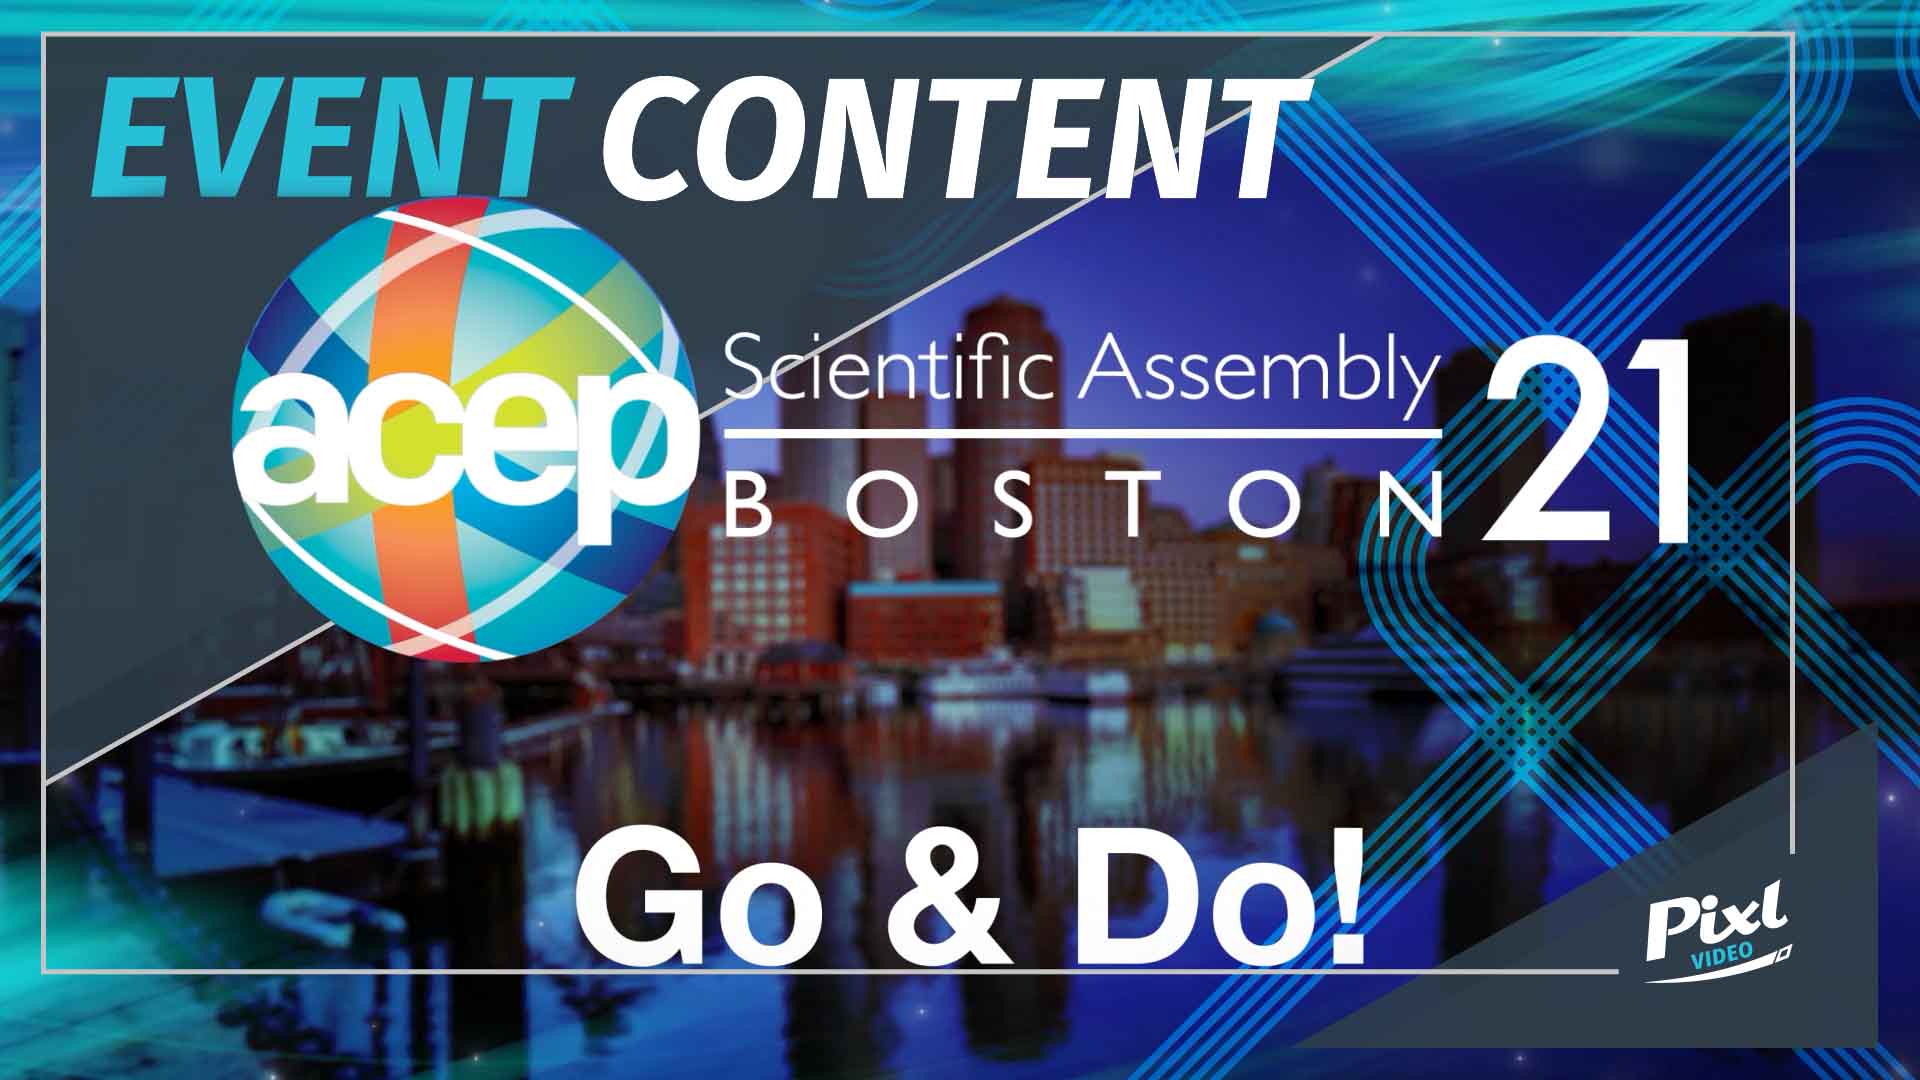 ACEP Scientific Assembly 21 graphic, an example of video production services Pixl performed for ACEP